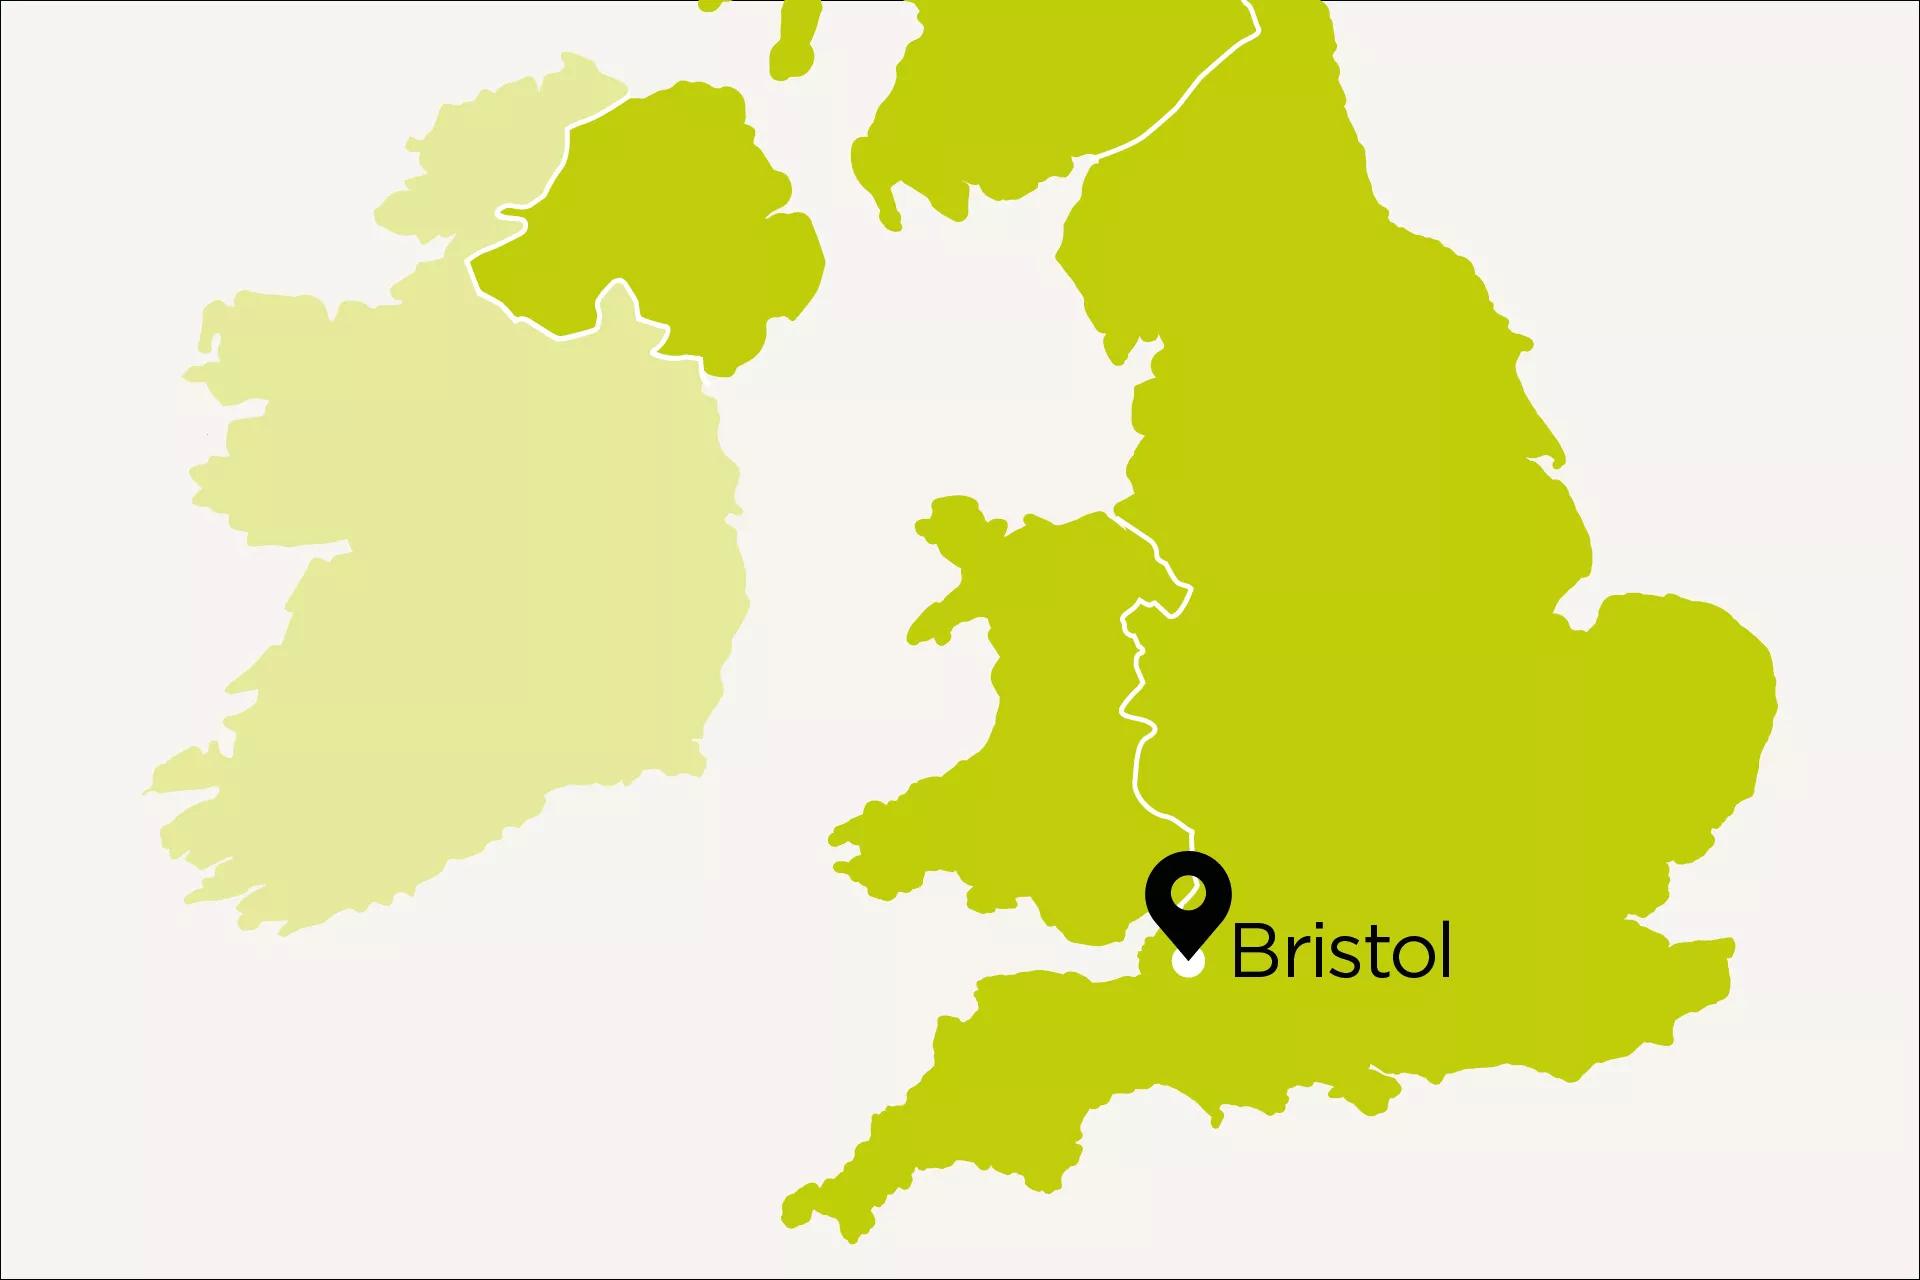 Map of UK with Bristol pinpoint